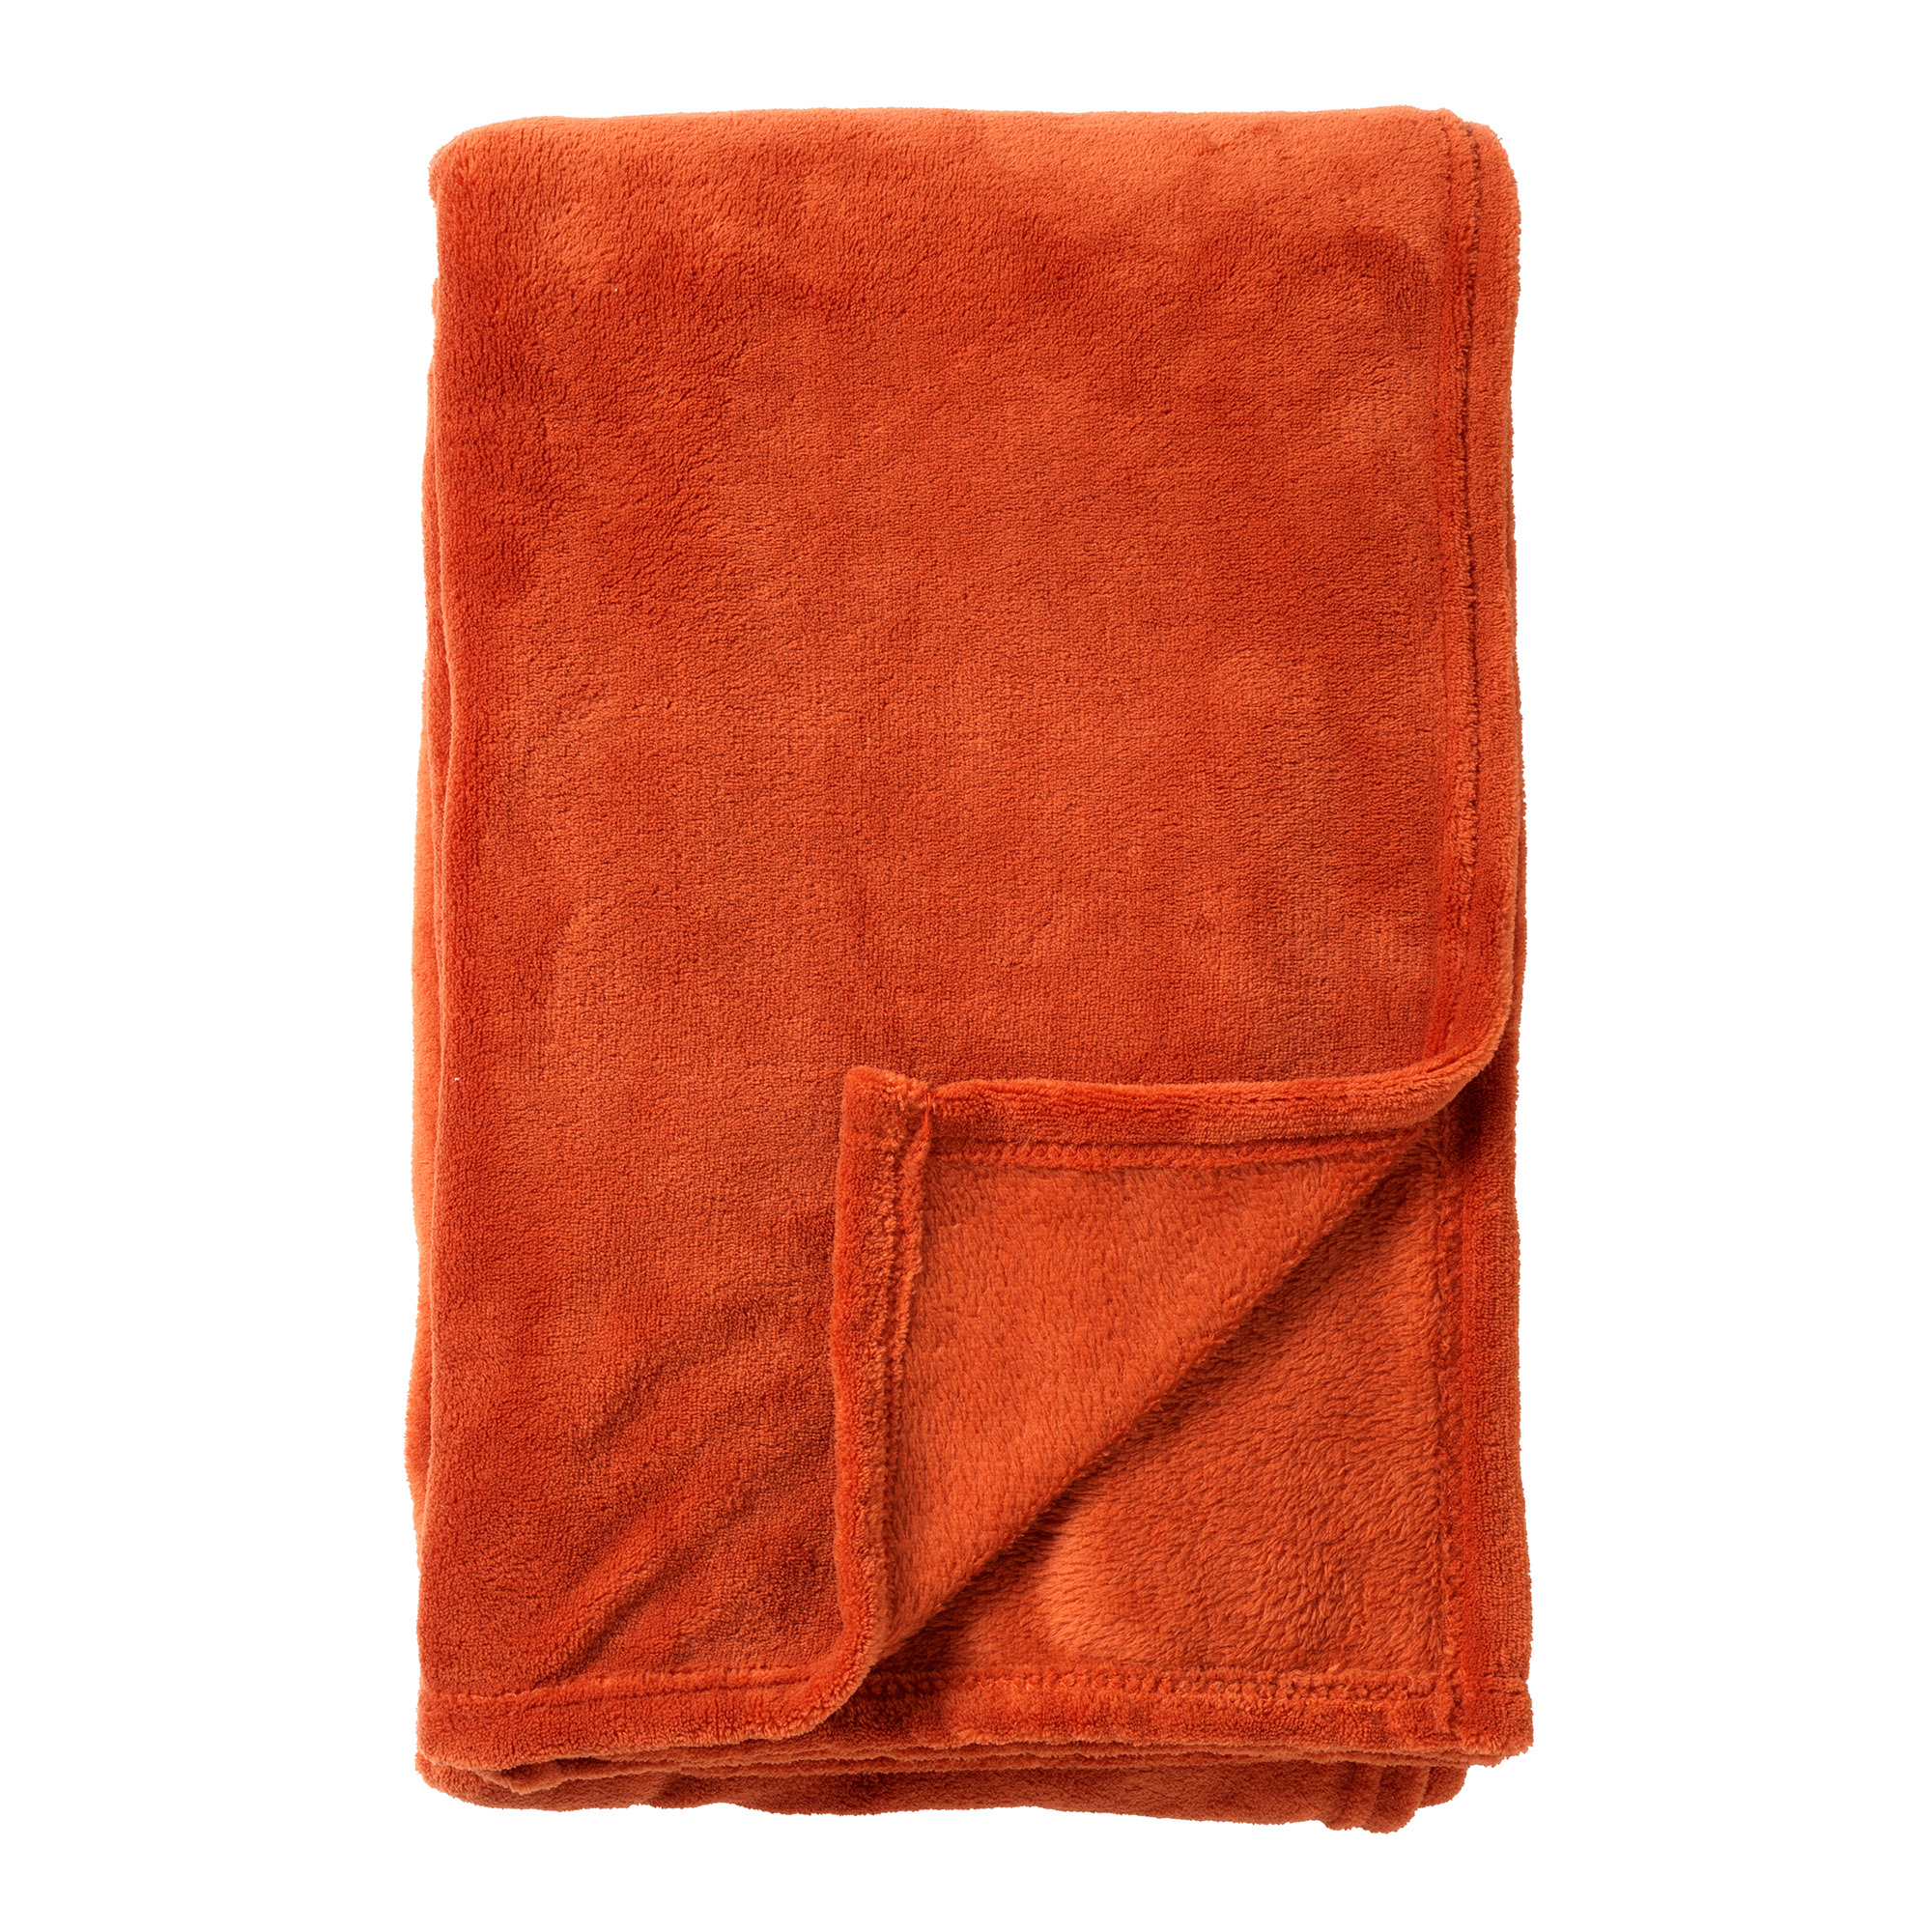 SIDNEY - Plaid 140x180 cm - Fleece blanket made of 100% recycled polyester - super soft - Eco Line collection - Potters Clay - orange